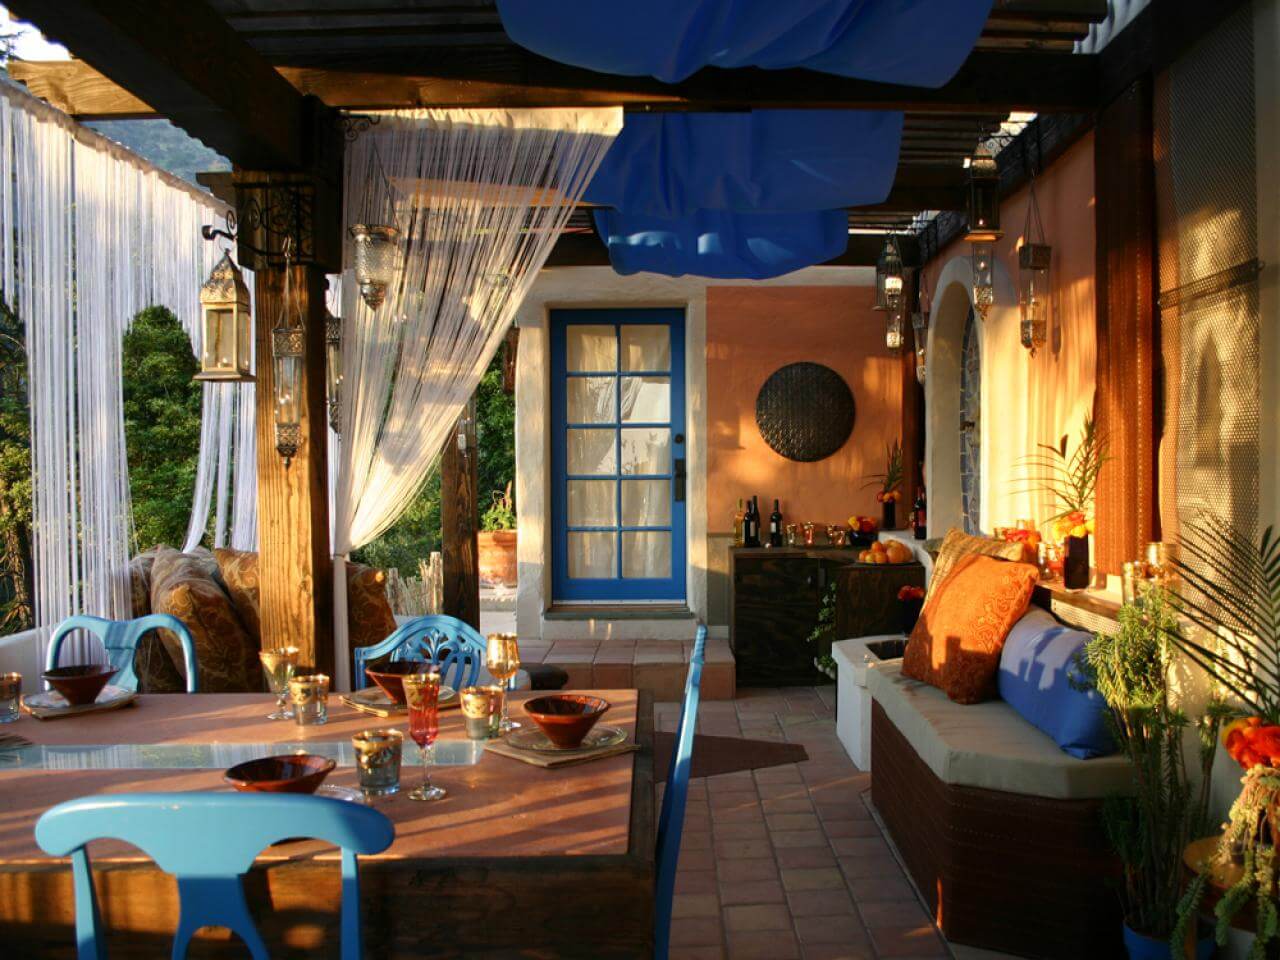 Dreamy Patio Dining Area with Blue Accents